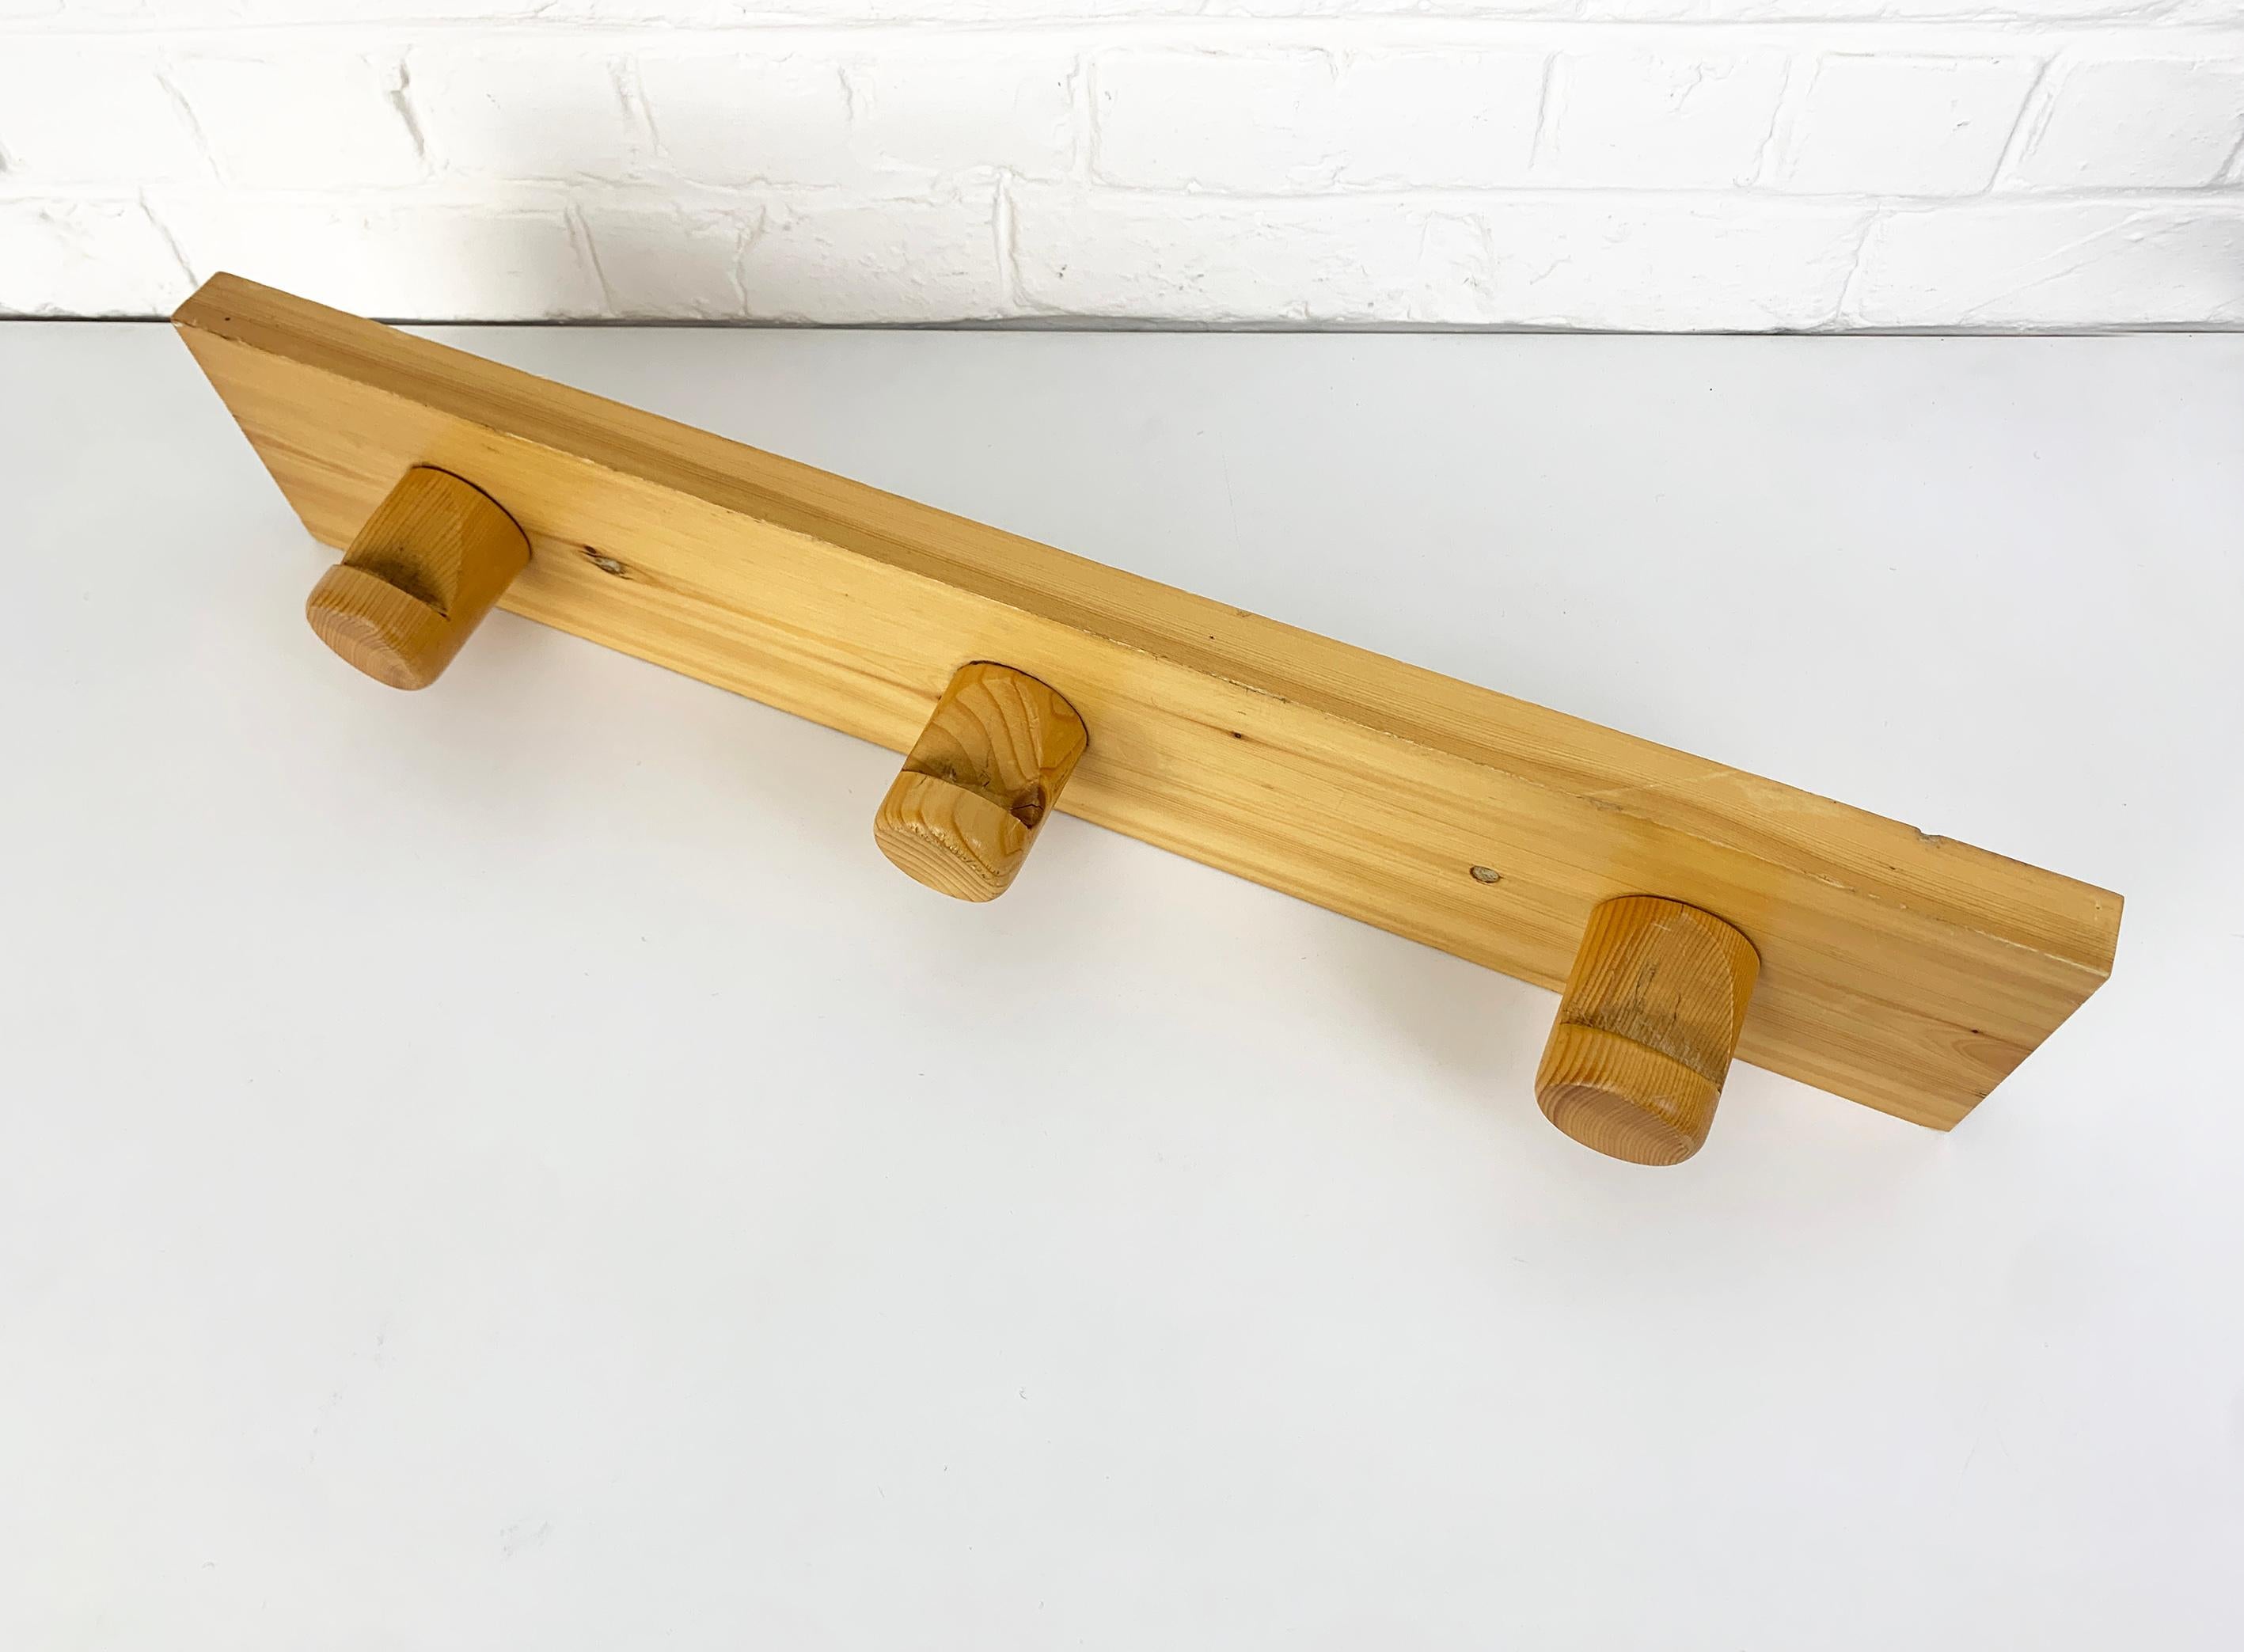 French Coat Rack by Charlotte Perriand for Les Arcs, Pinewood, 1960s - 3 avail. For Sale 5